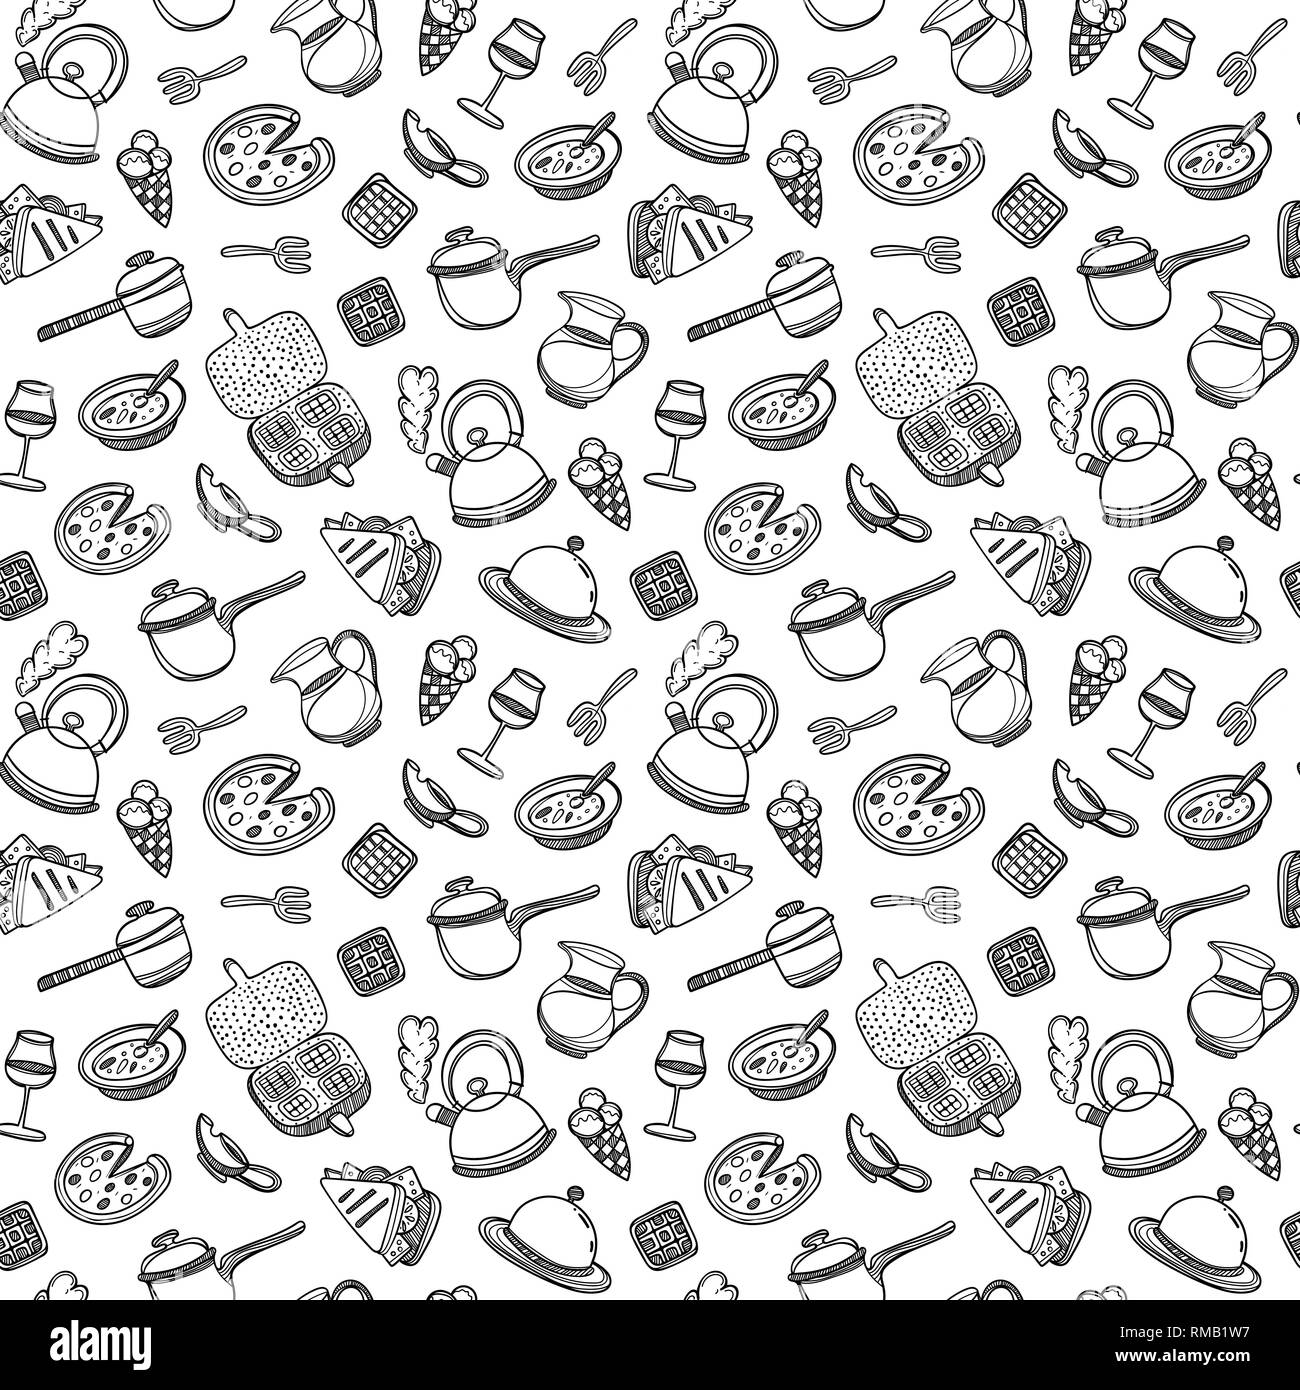 Cartoon cute food and kitchenware on white background. Seamless pattern. Linear coloring illustration. For zentangle book. Breakfast time Stock Vector